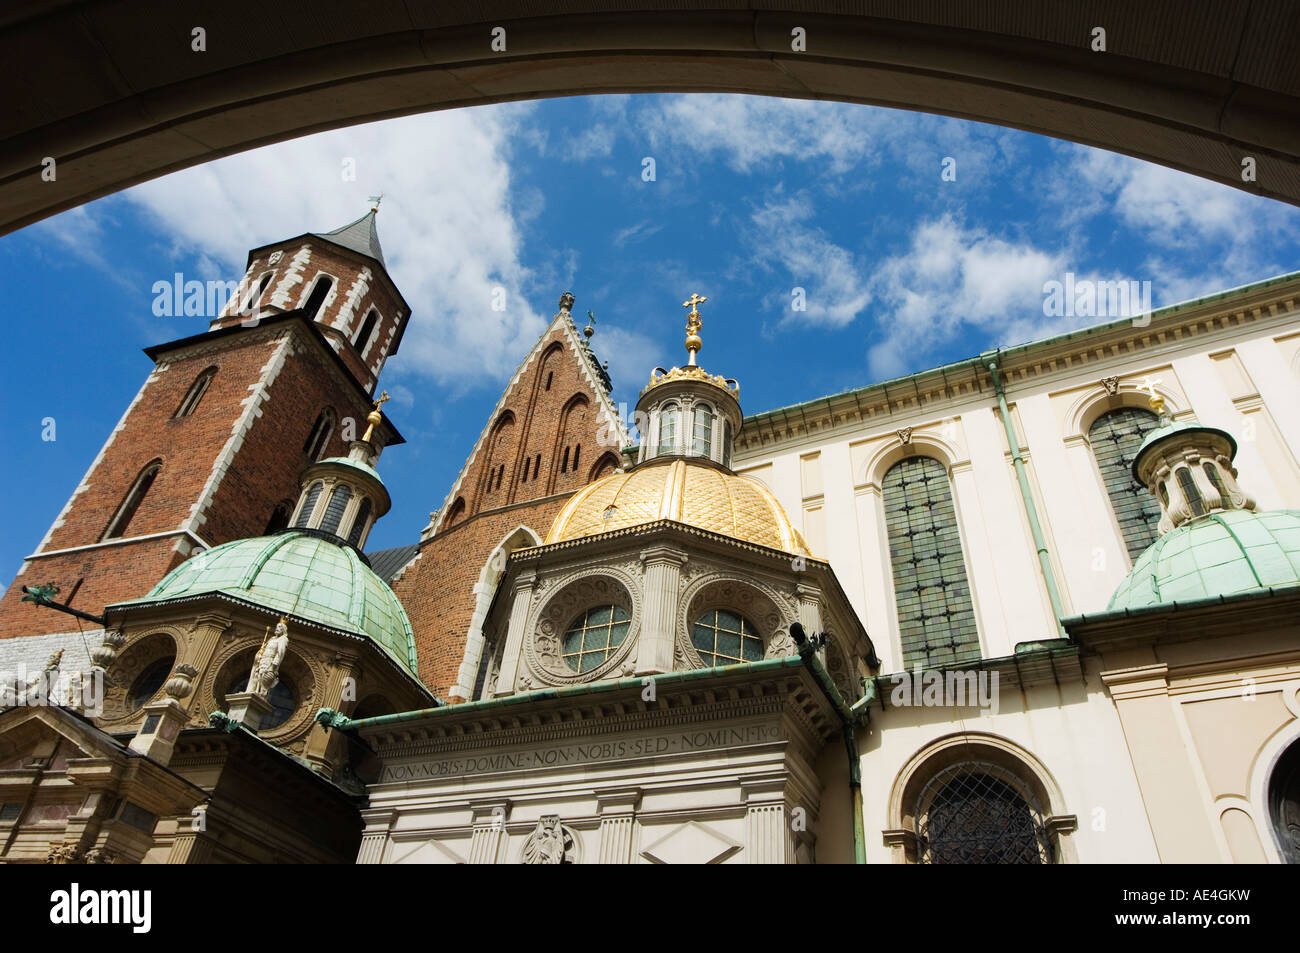 Wawel Cathedral dating from 14th century, Old Town, UNESCO World Heritage Site, Krakow (Cracow), Poland, Europe Stock Photo